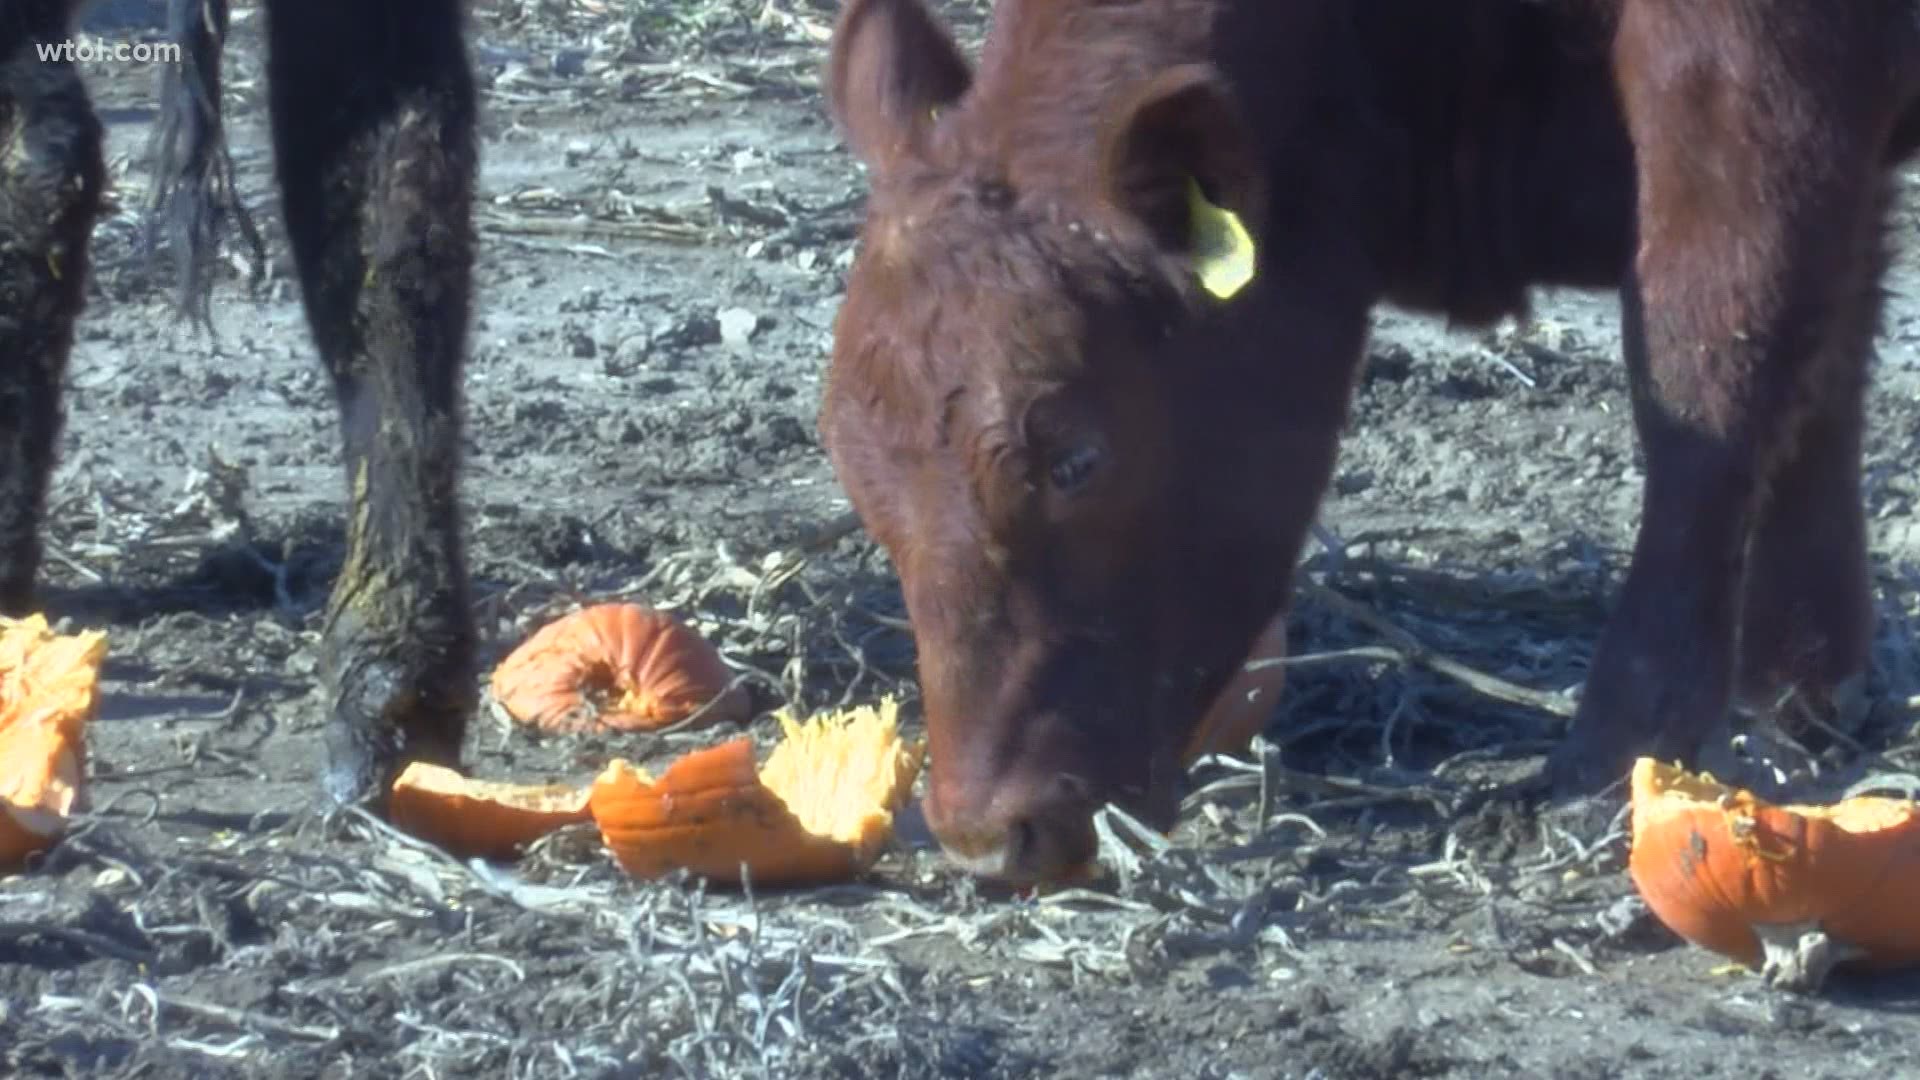 Gust brothers pumpkin farm puts leftover pumpkins to good use